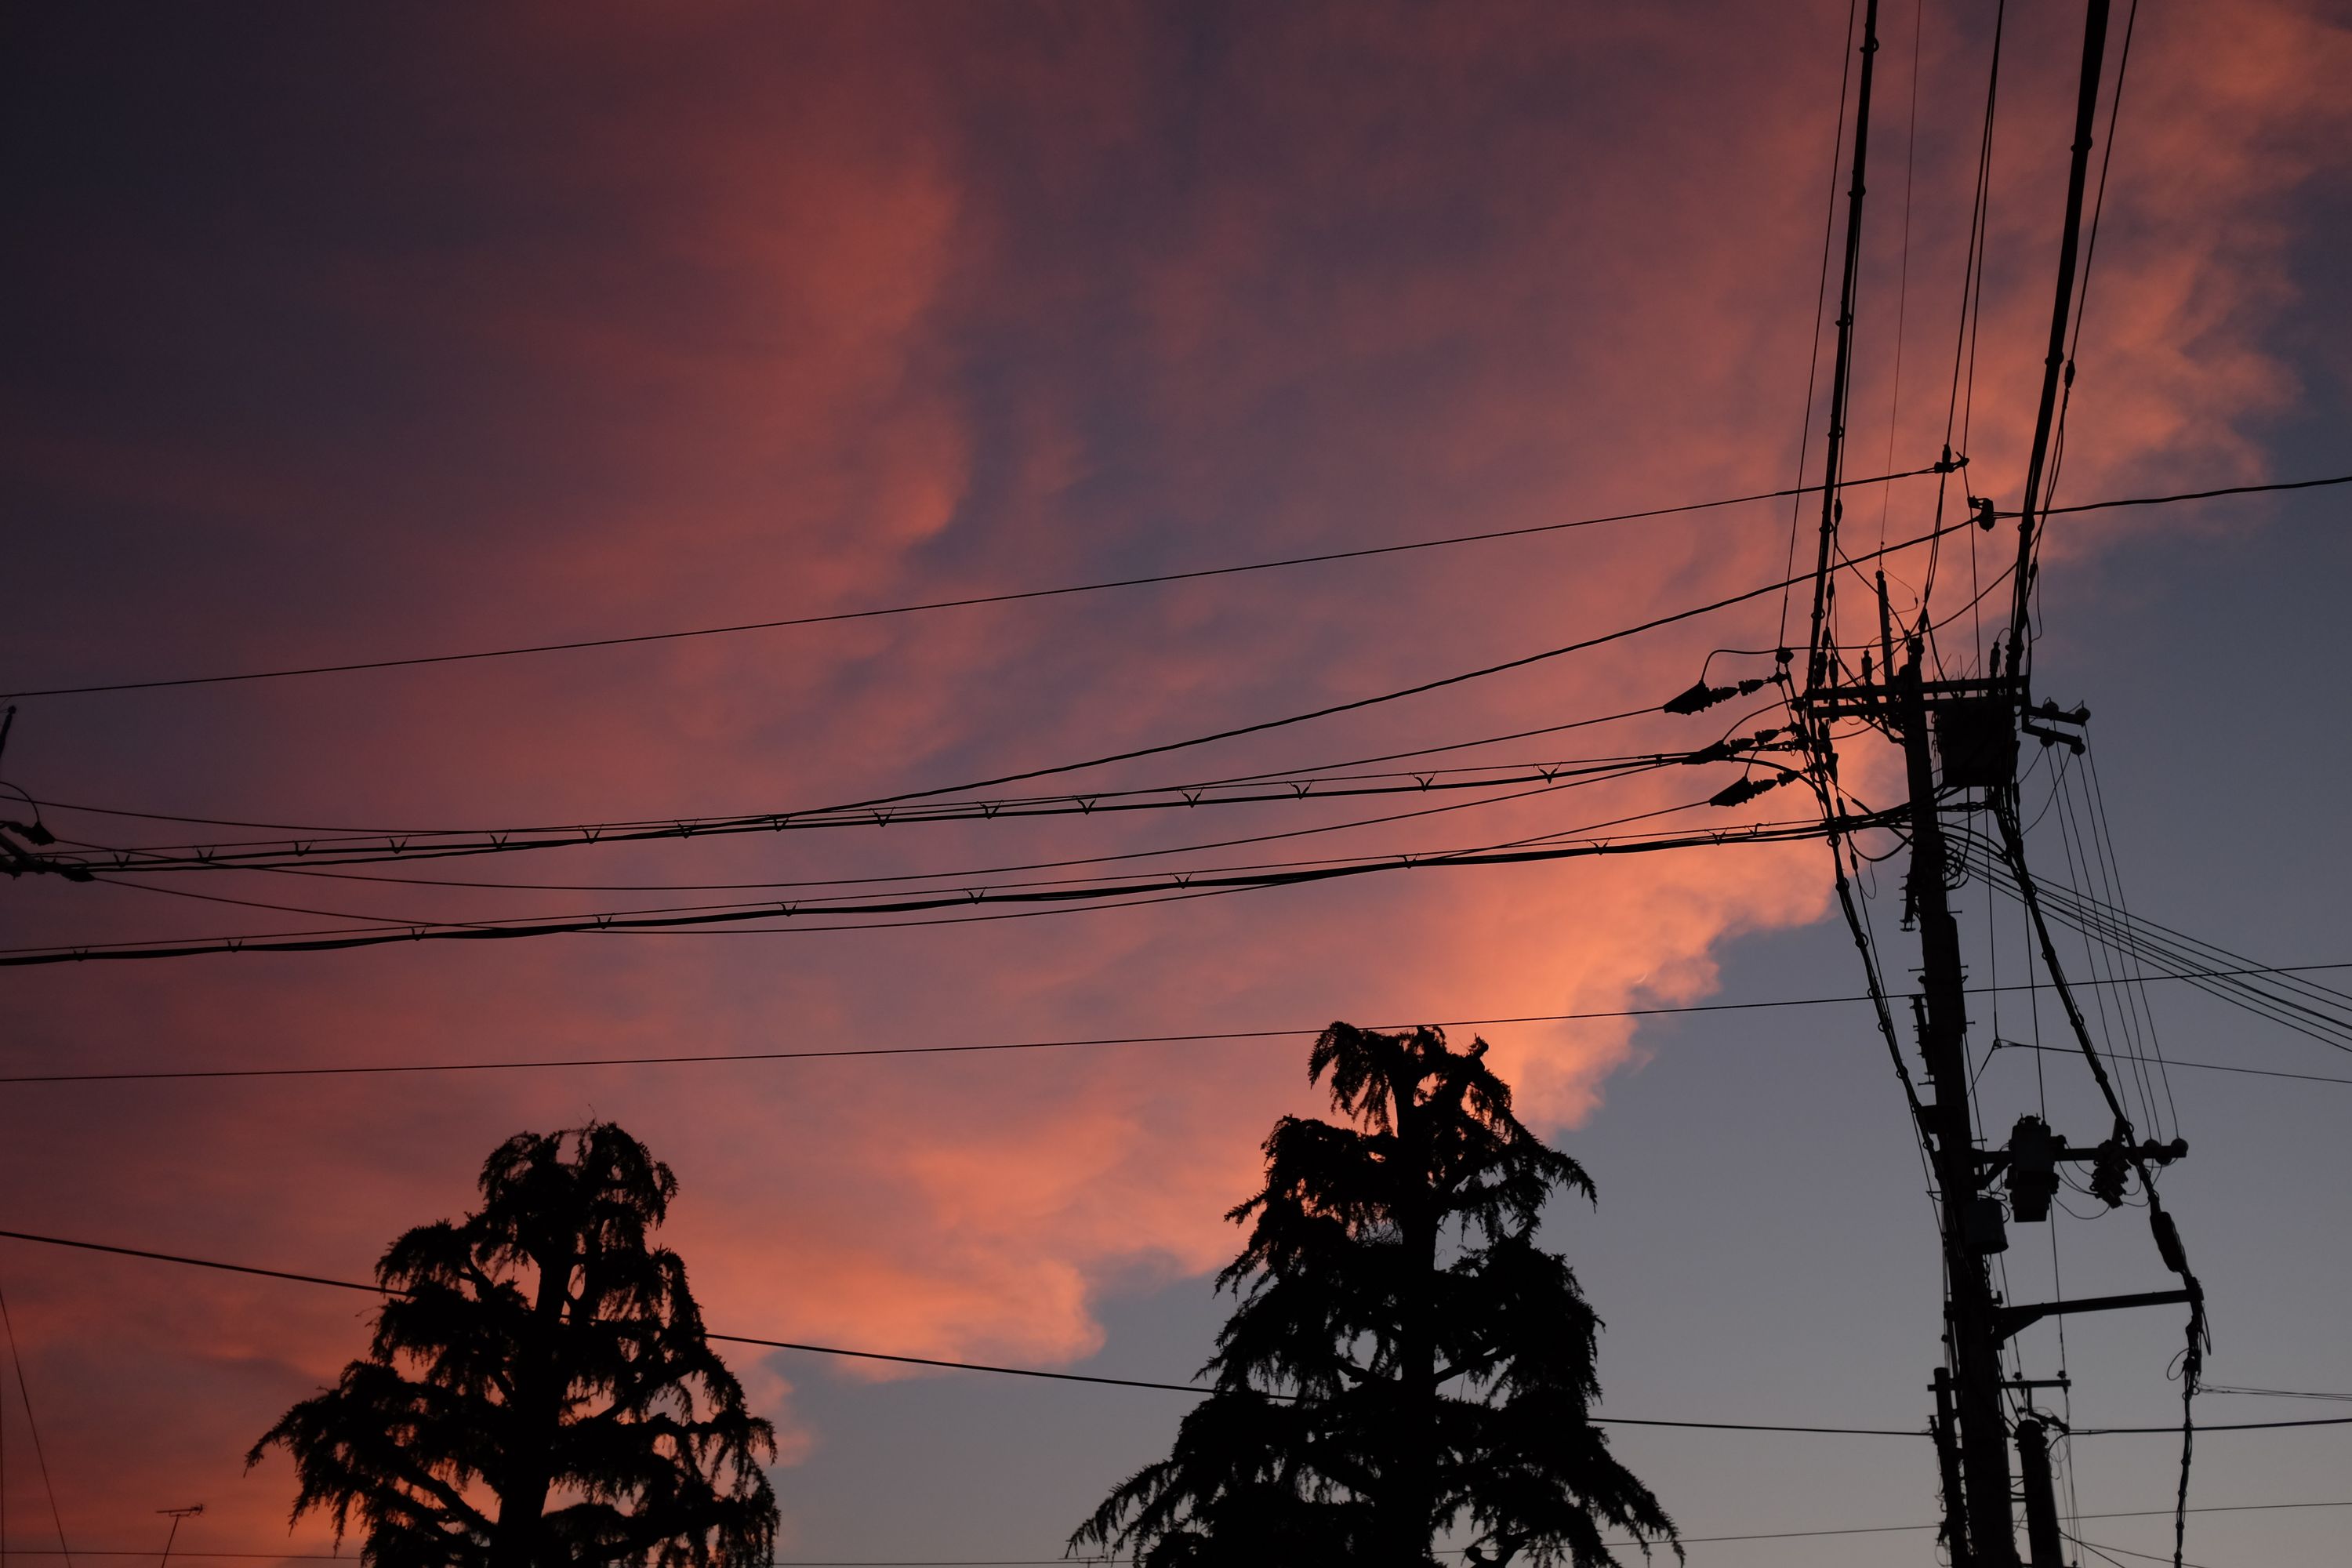 Pink clouds in the sky above two pines and many power lines.